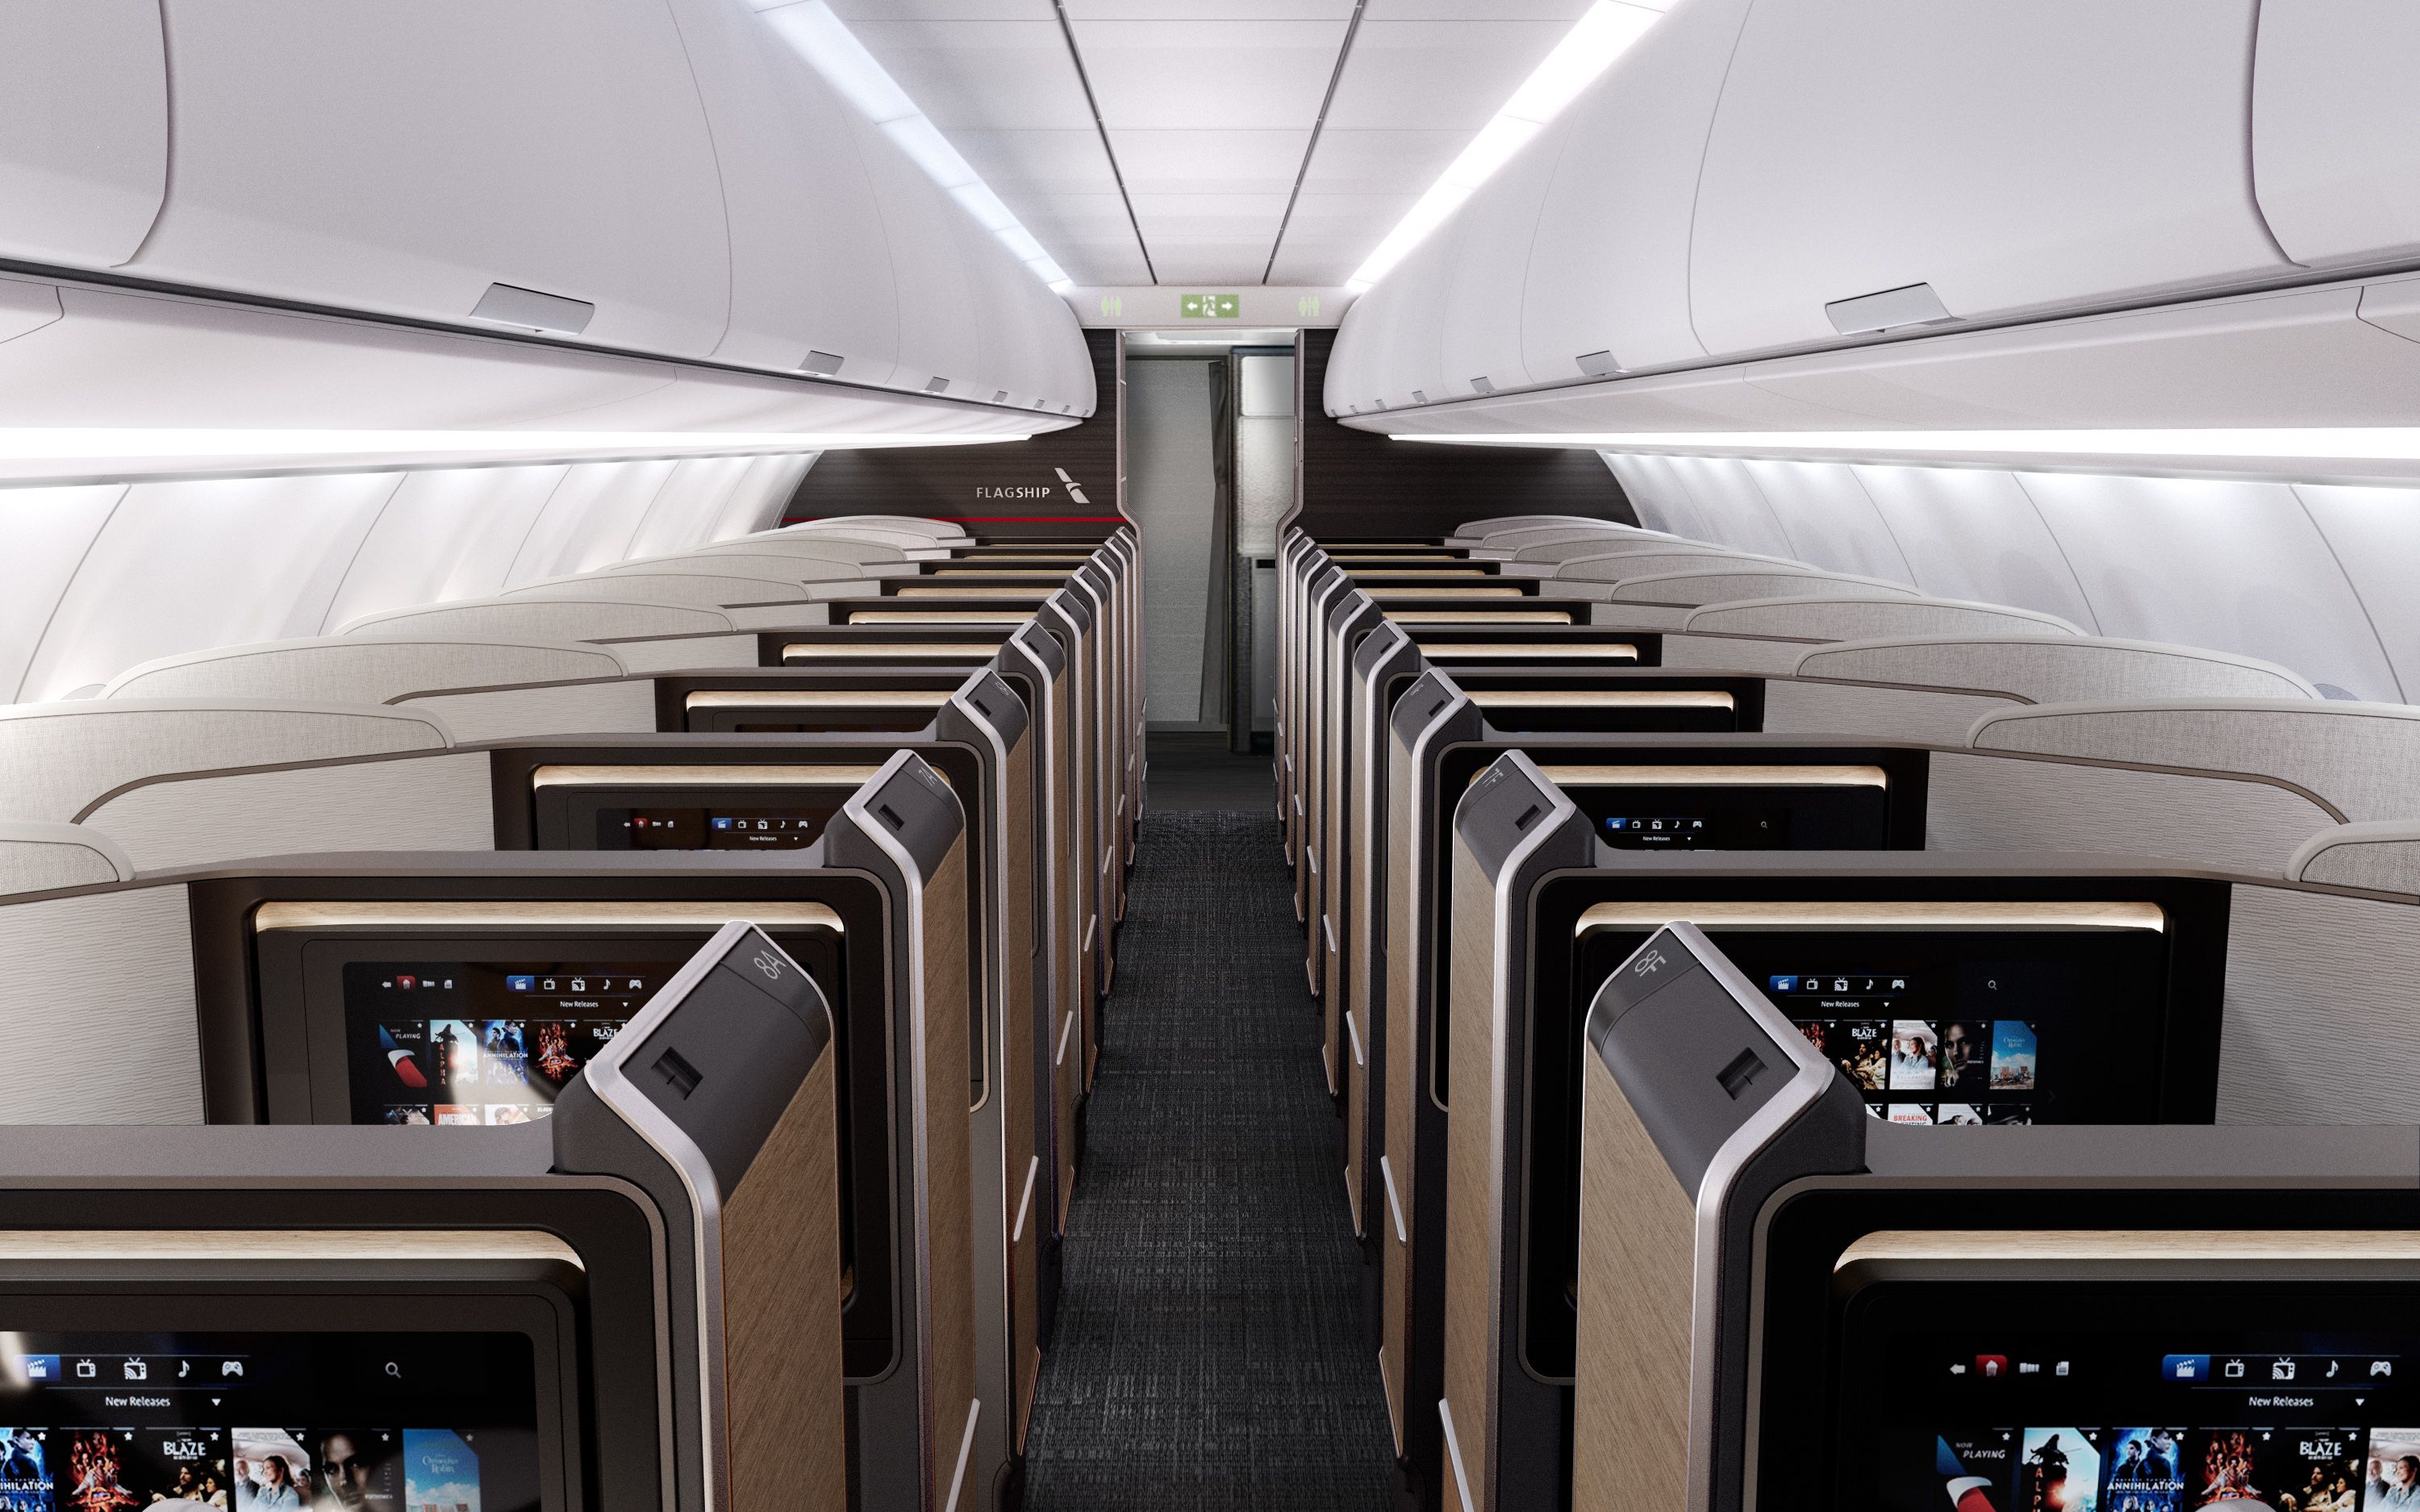 Inside American Airlines Flagship Suite cabin on the A321XLR.